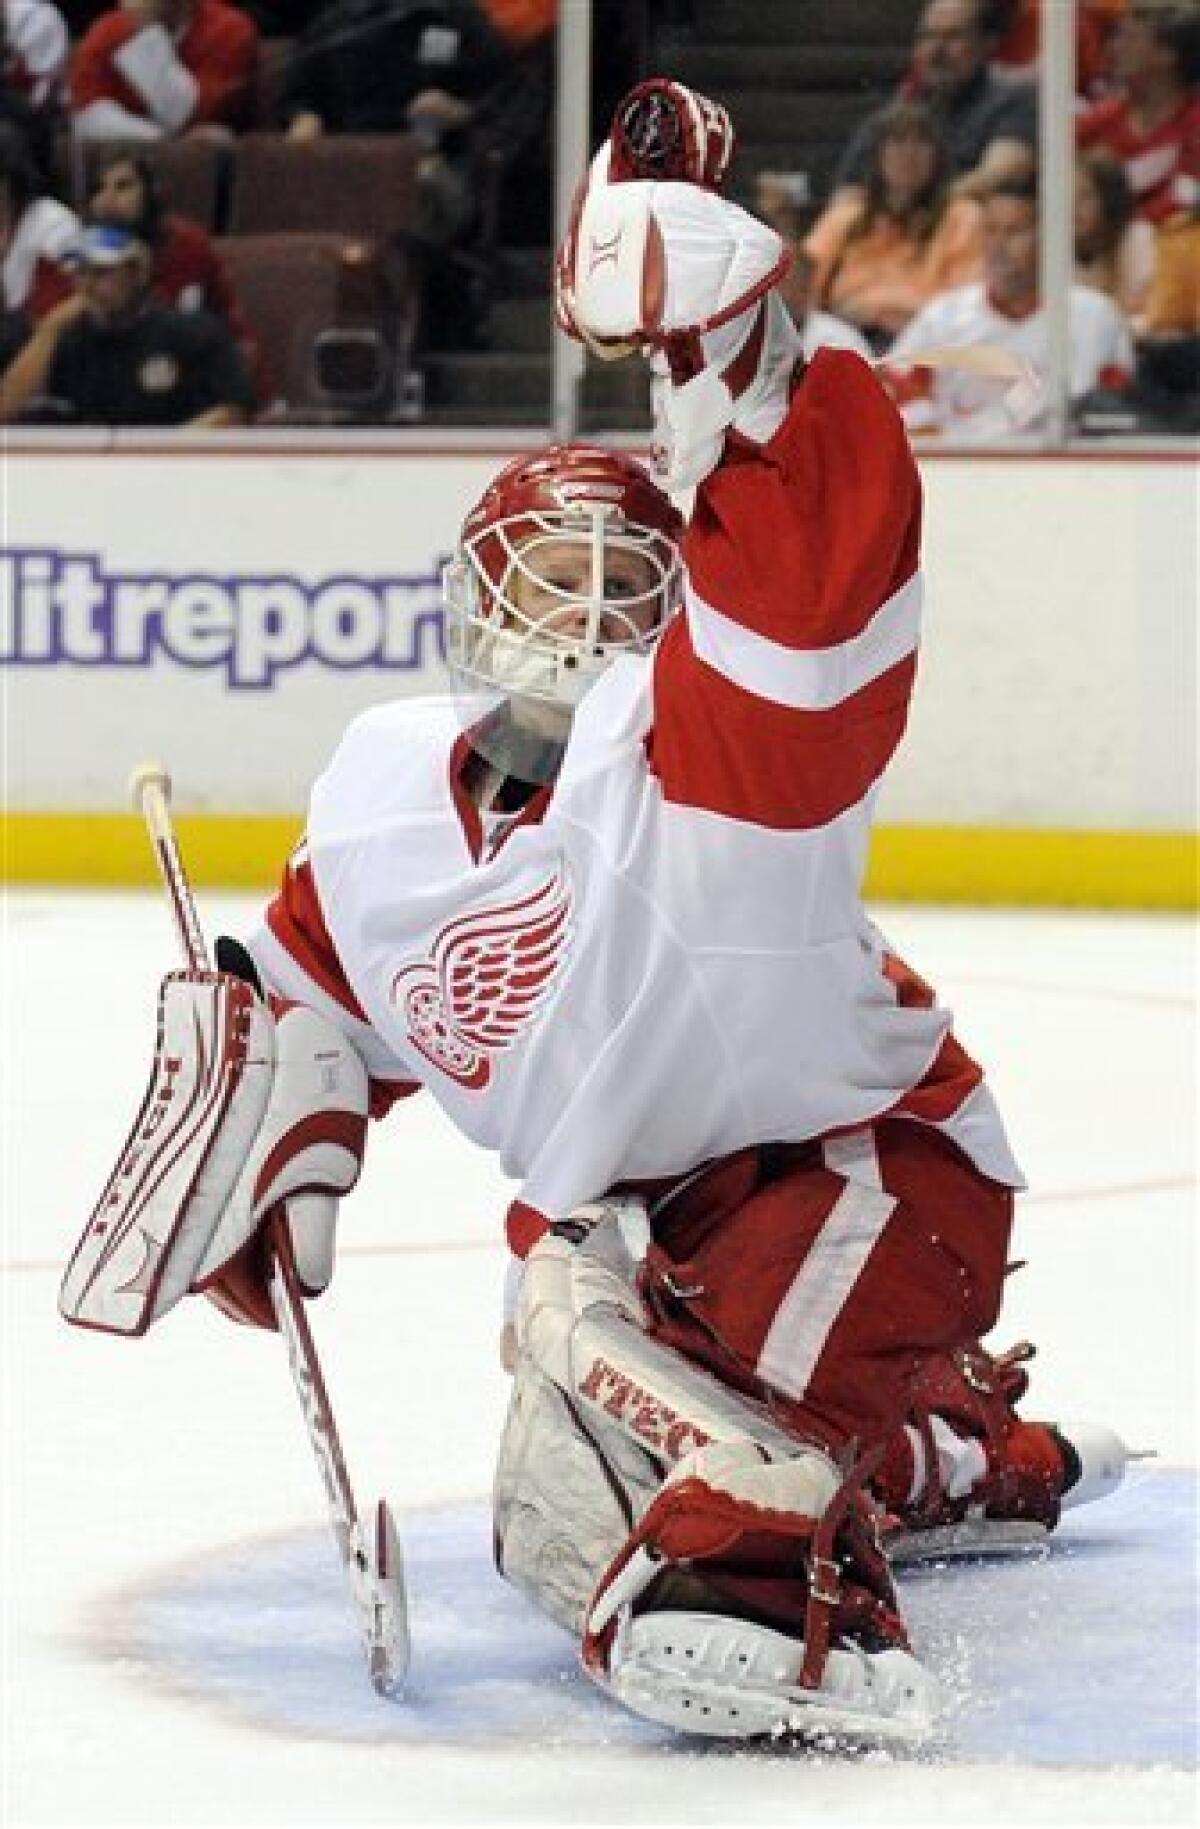 HD wallpaper: 2008, The game, Sport, Ice, Victory, Detroit, NHL, Hockey, Red  Wings